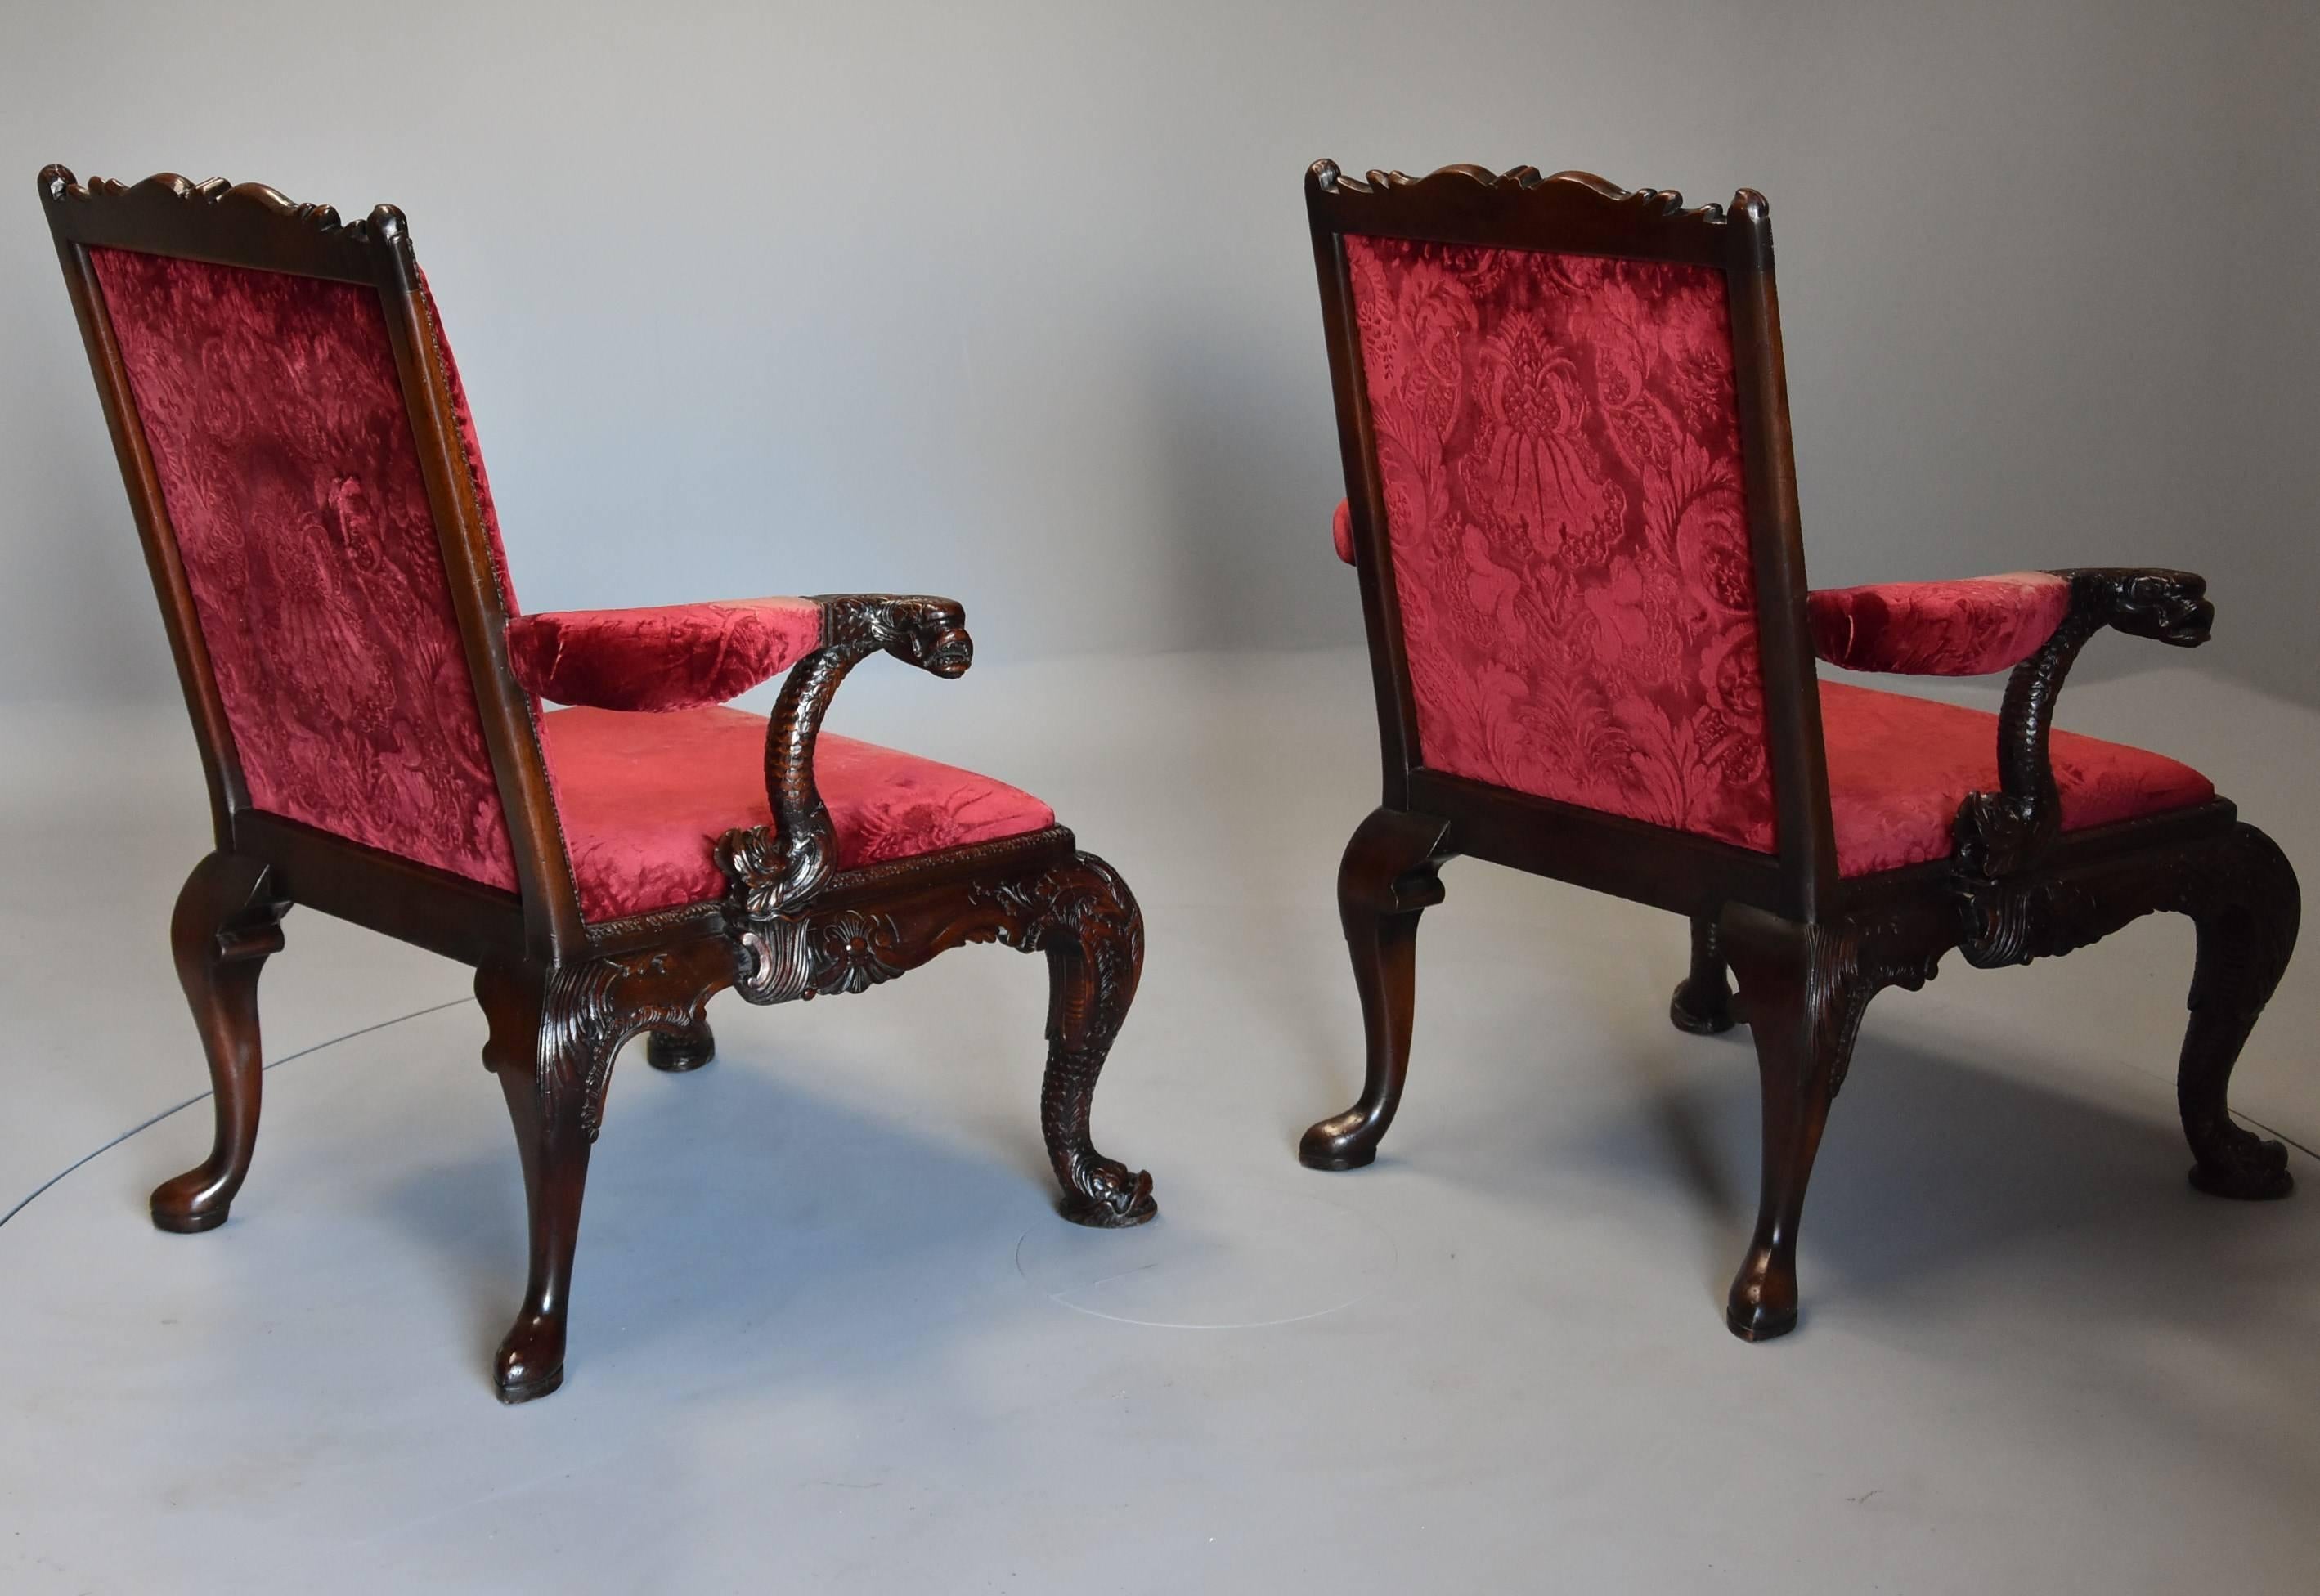 Pair of Late 19th Century George II Style Mahogany Gainsborough Armchairs For Sale 6